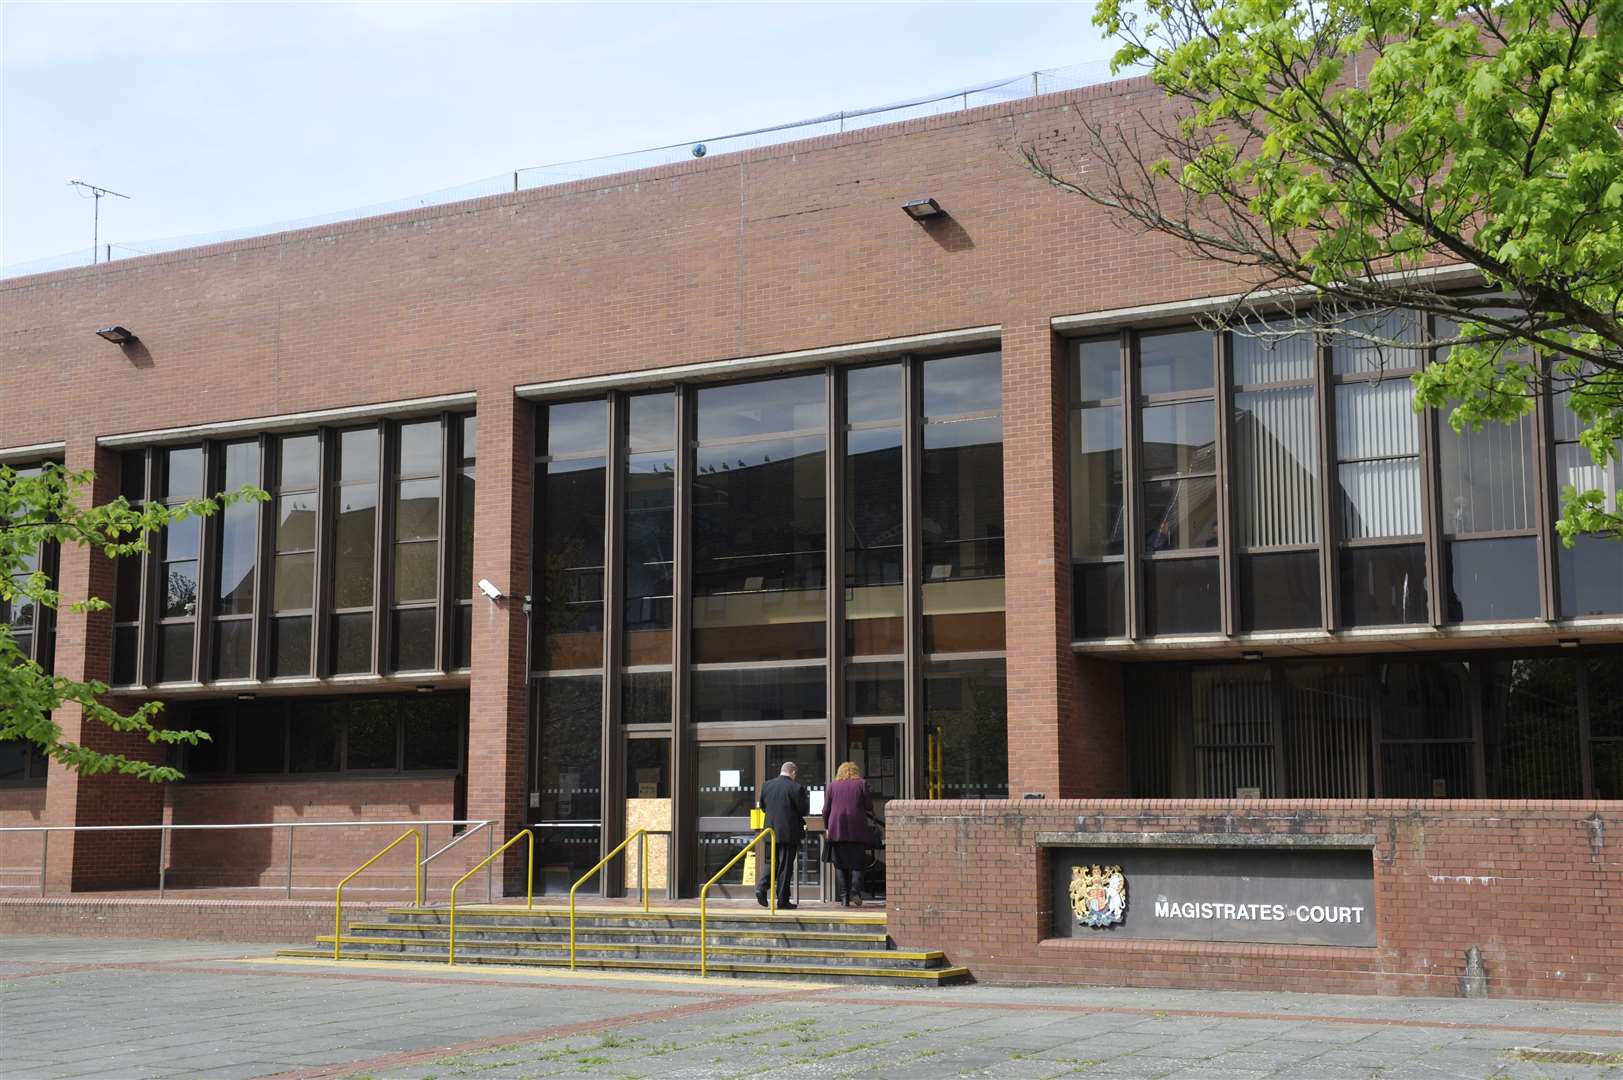 The hearing took place at Folkestone Magistrates' Court